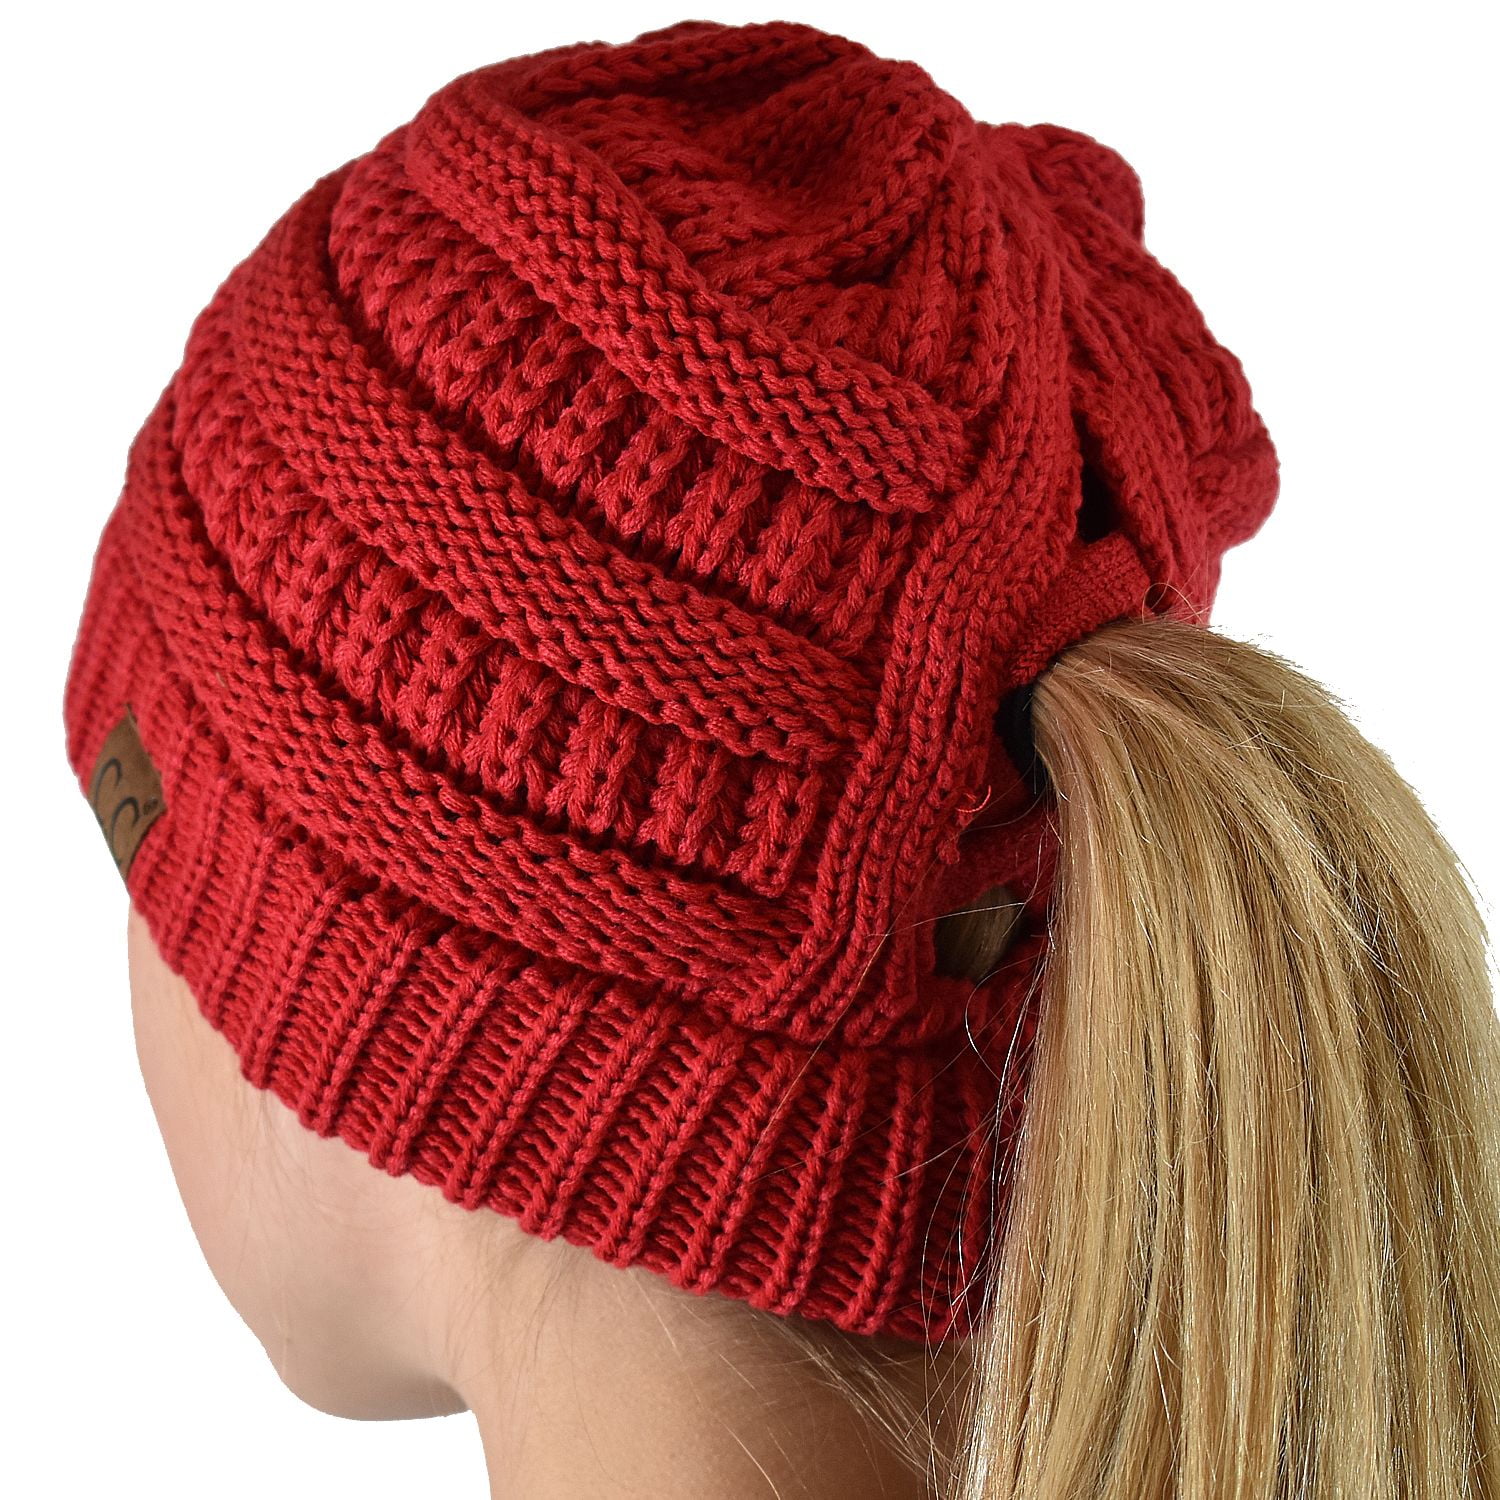 MB-20A CCB-1 C.C Exclusives Soft Stretch Cable Knit Messy Bun Ponytail Beanie Winter Hat for Women 